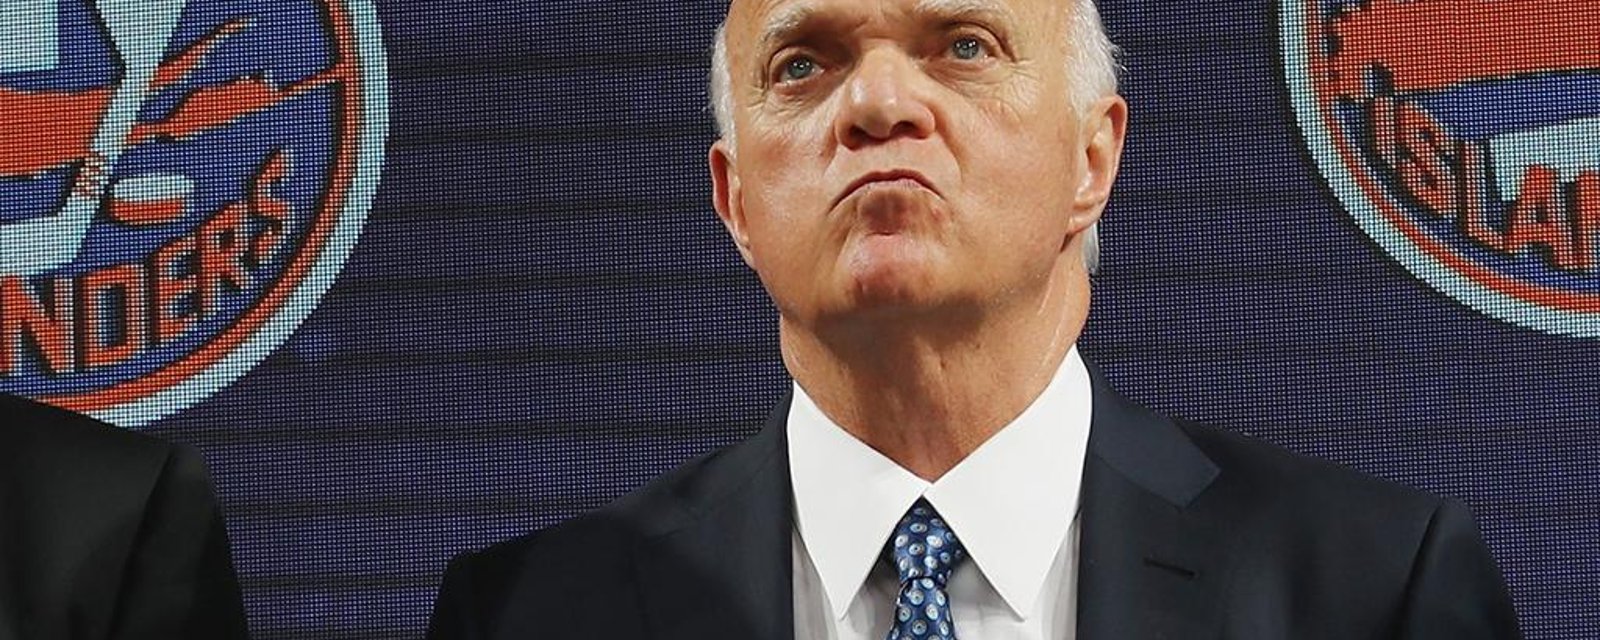 Lou Lamoriello finally pulls a series of moves which could lead to significant trade